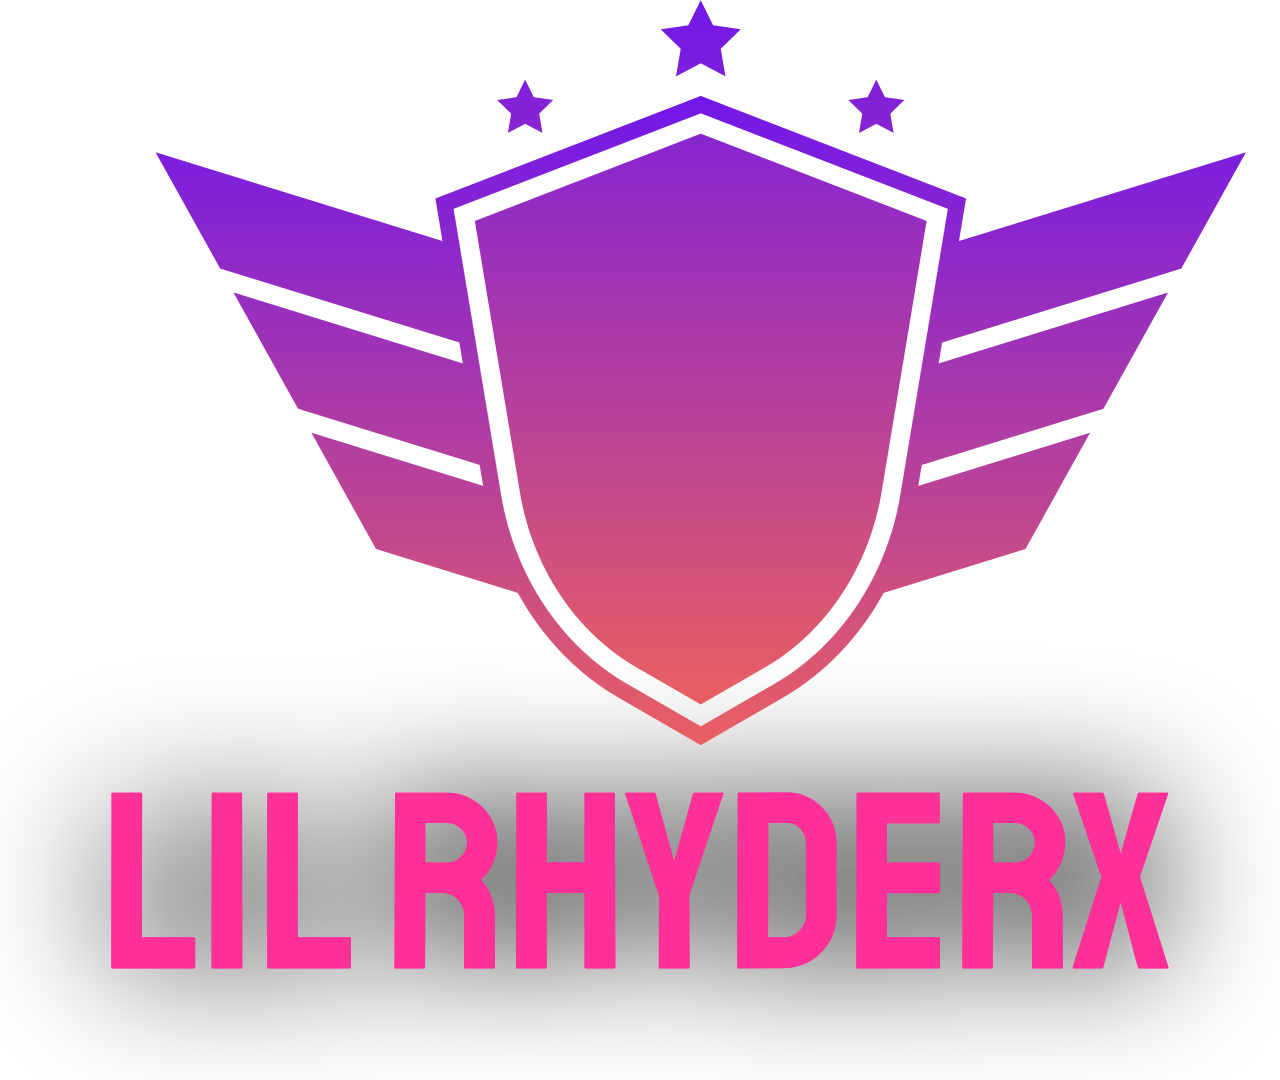 Lil RhyderX's web page